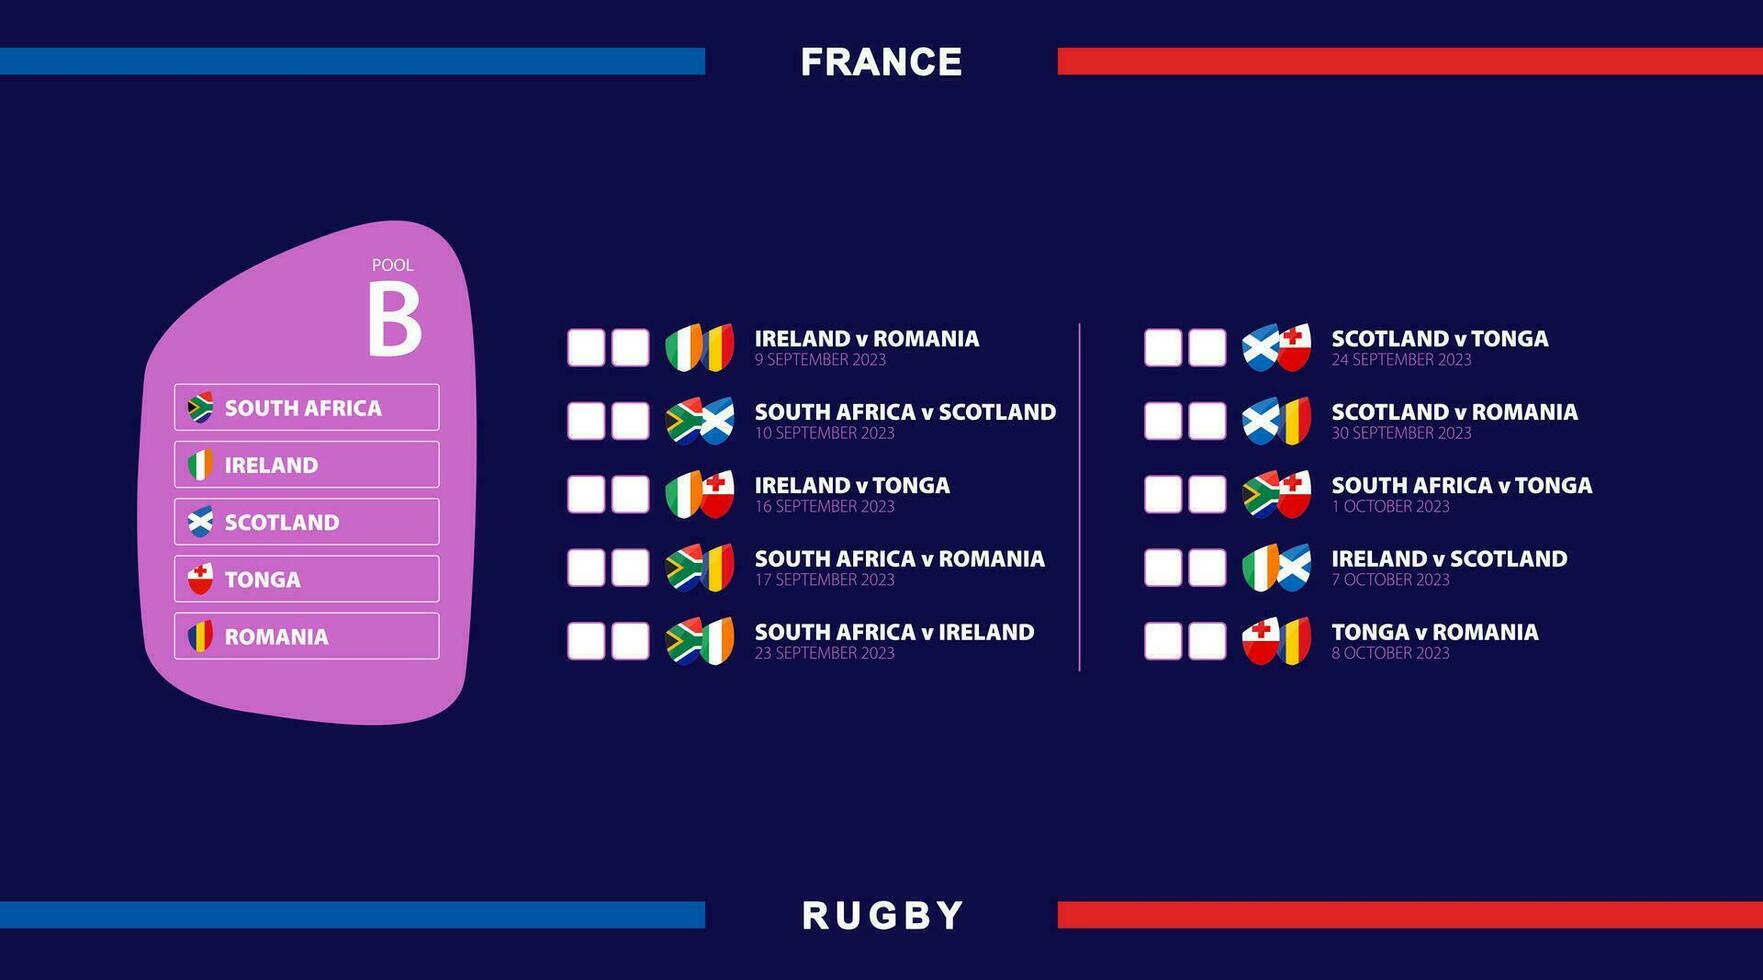 All rugby matches in pool B, flags of participants in international rugby competition in France. vector